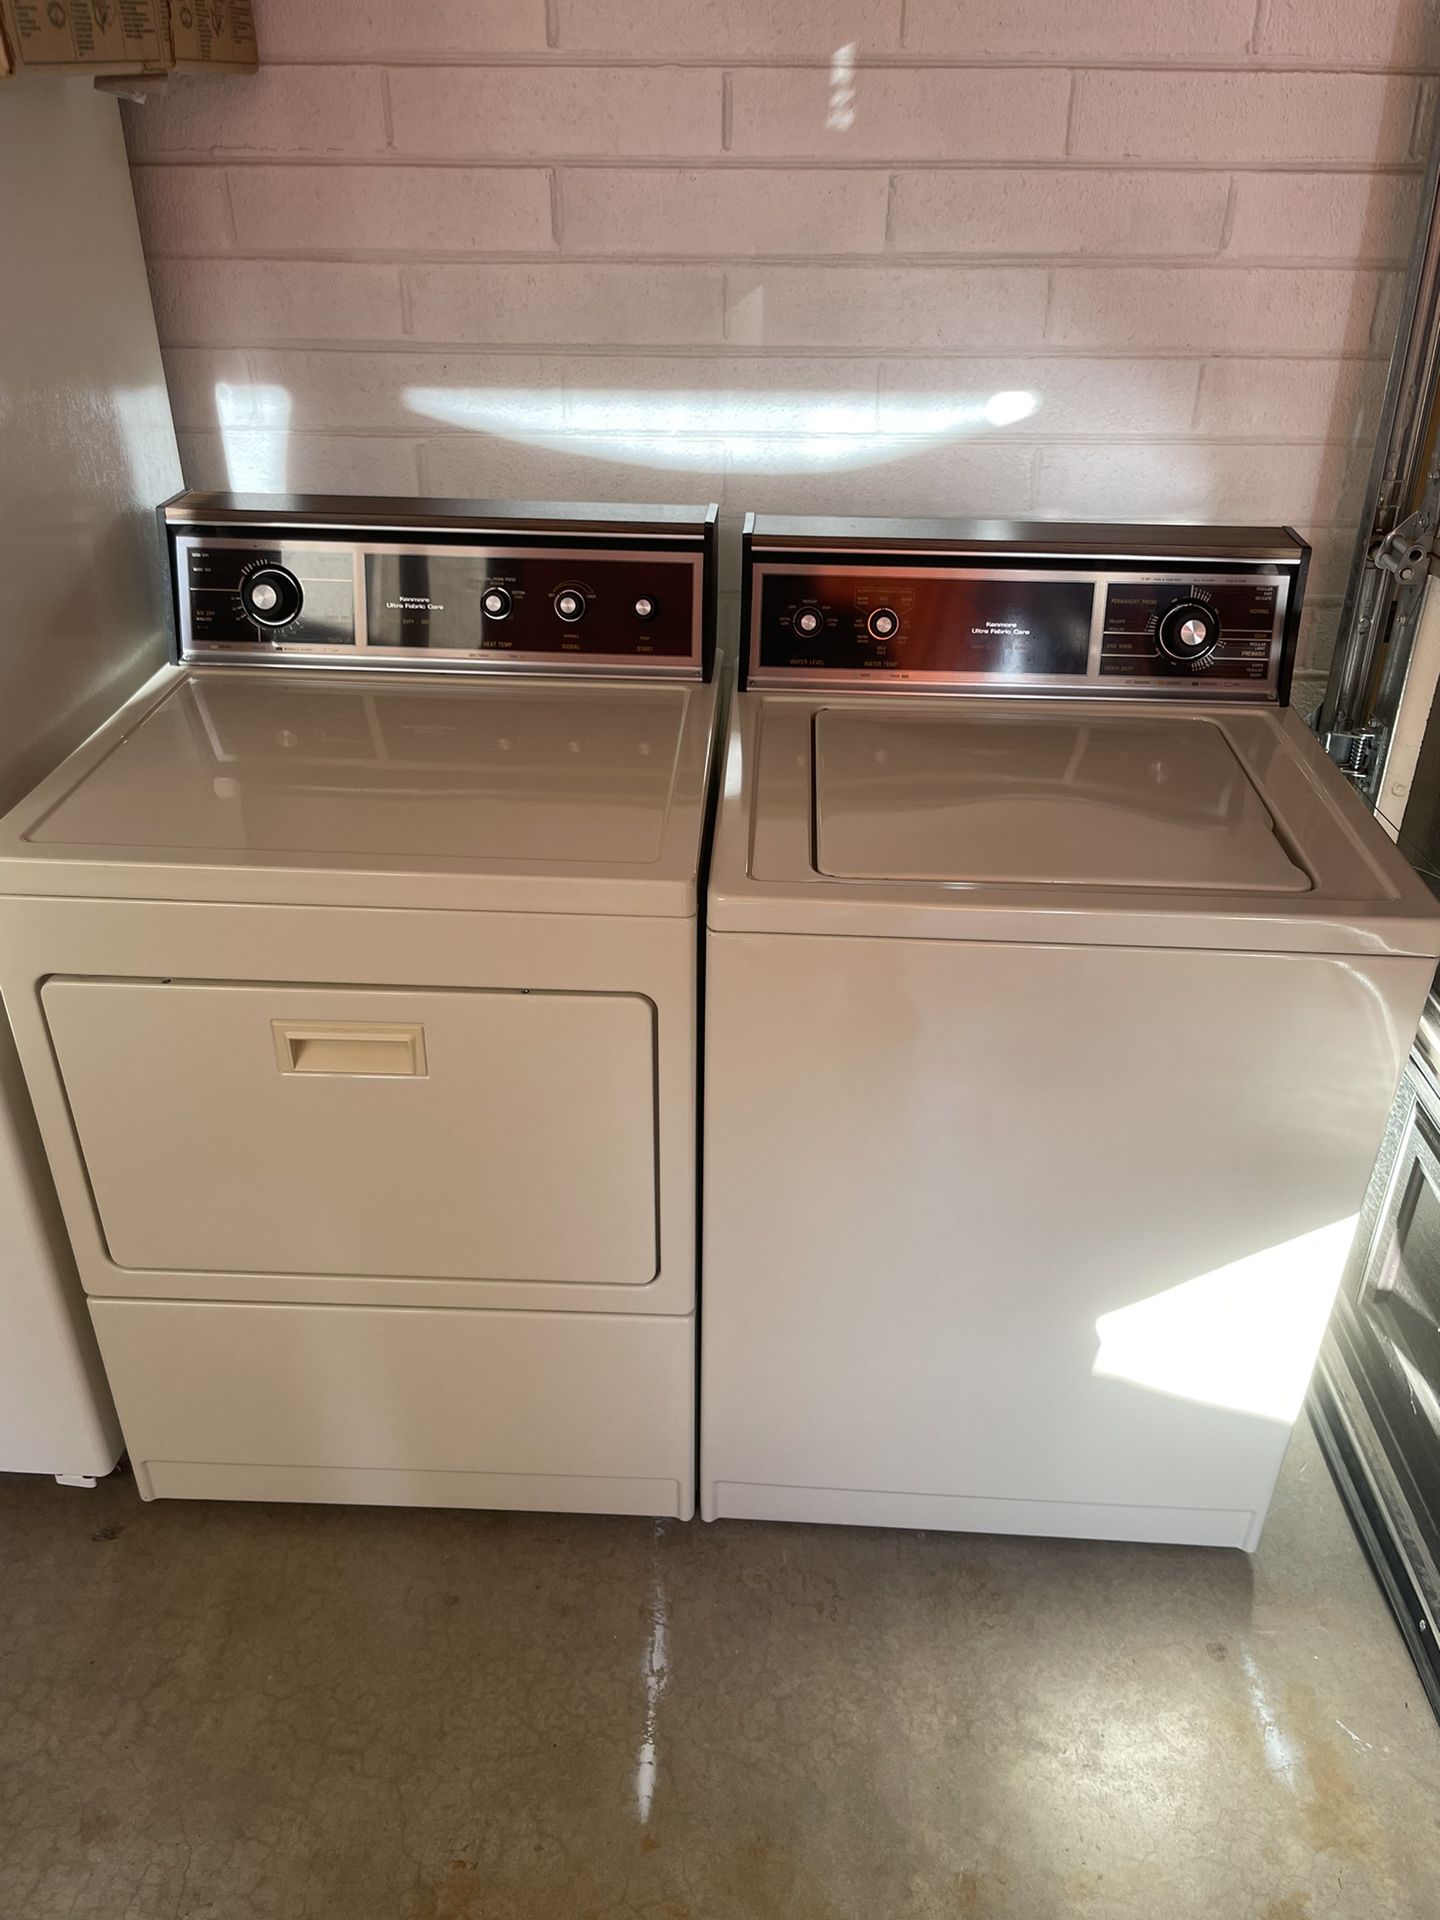 KENMORE WASHER AND DRYER SET $425